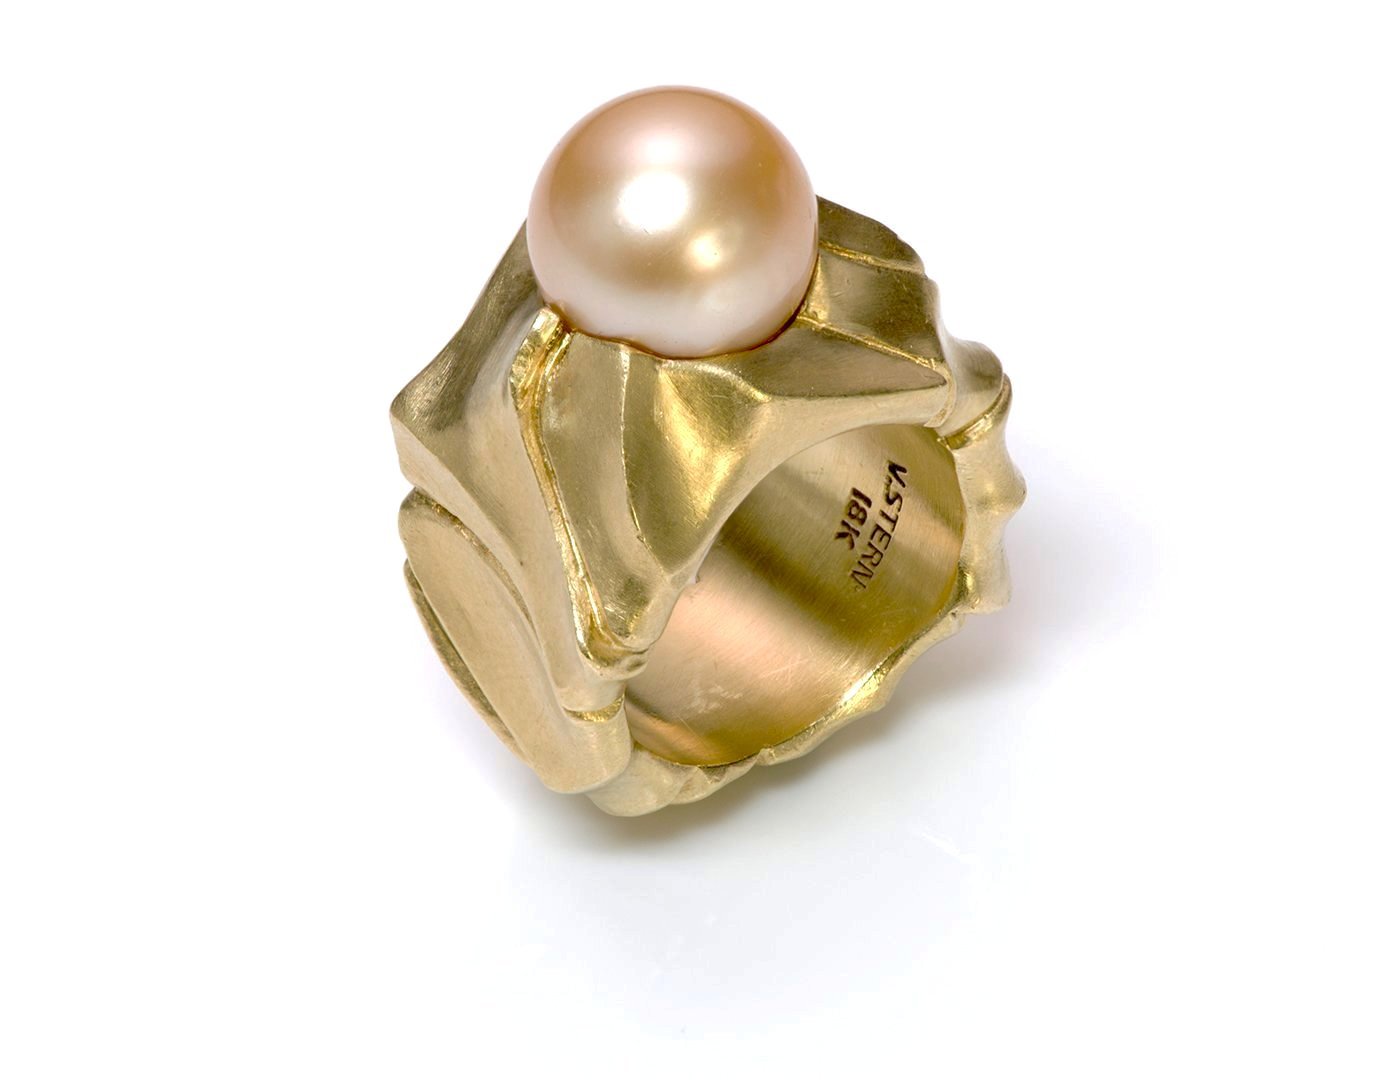 Modernistic V. Stern 18K Yellow Gold Pearl Ring